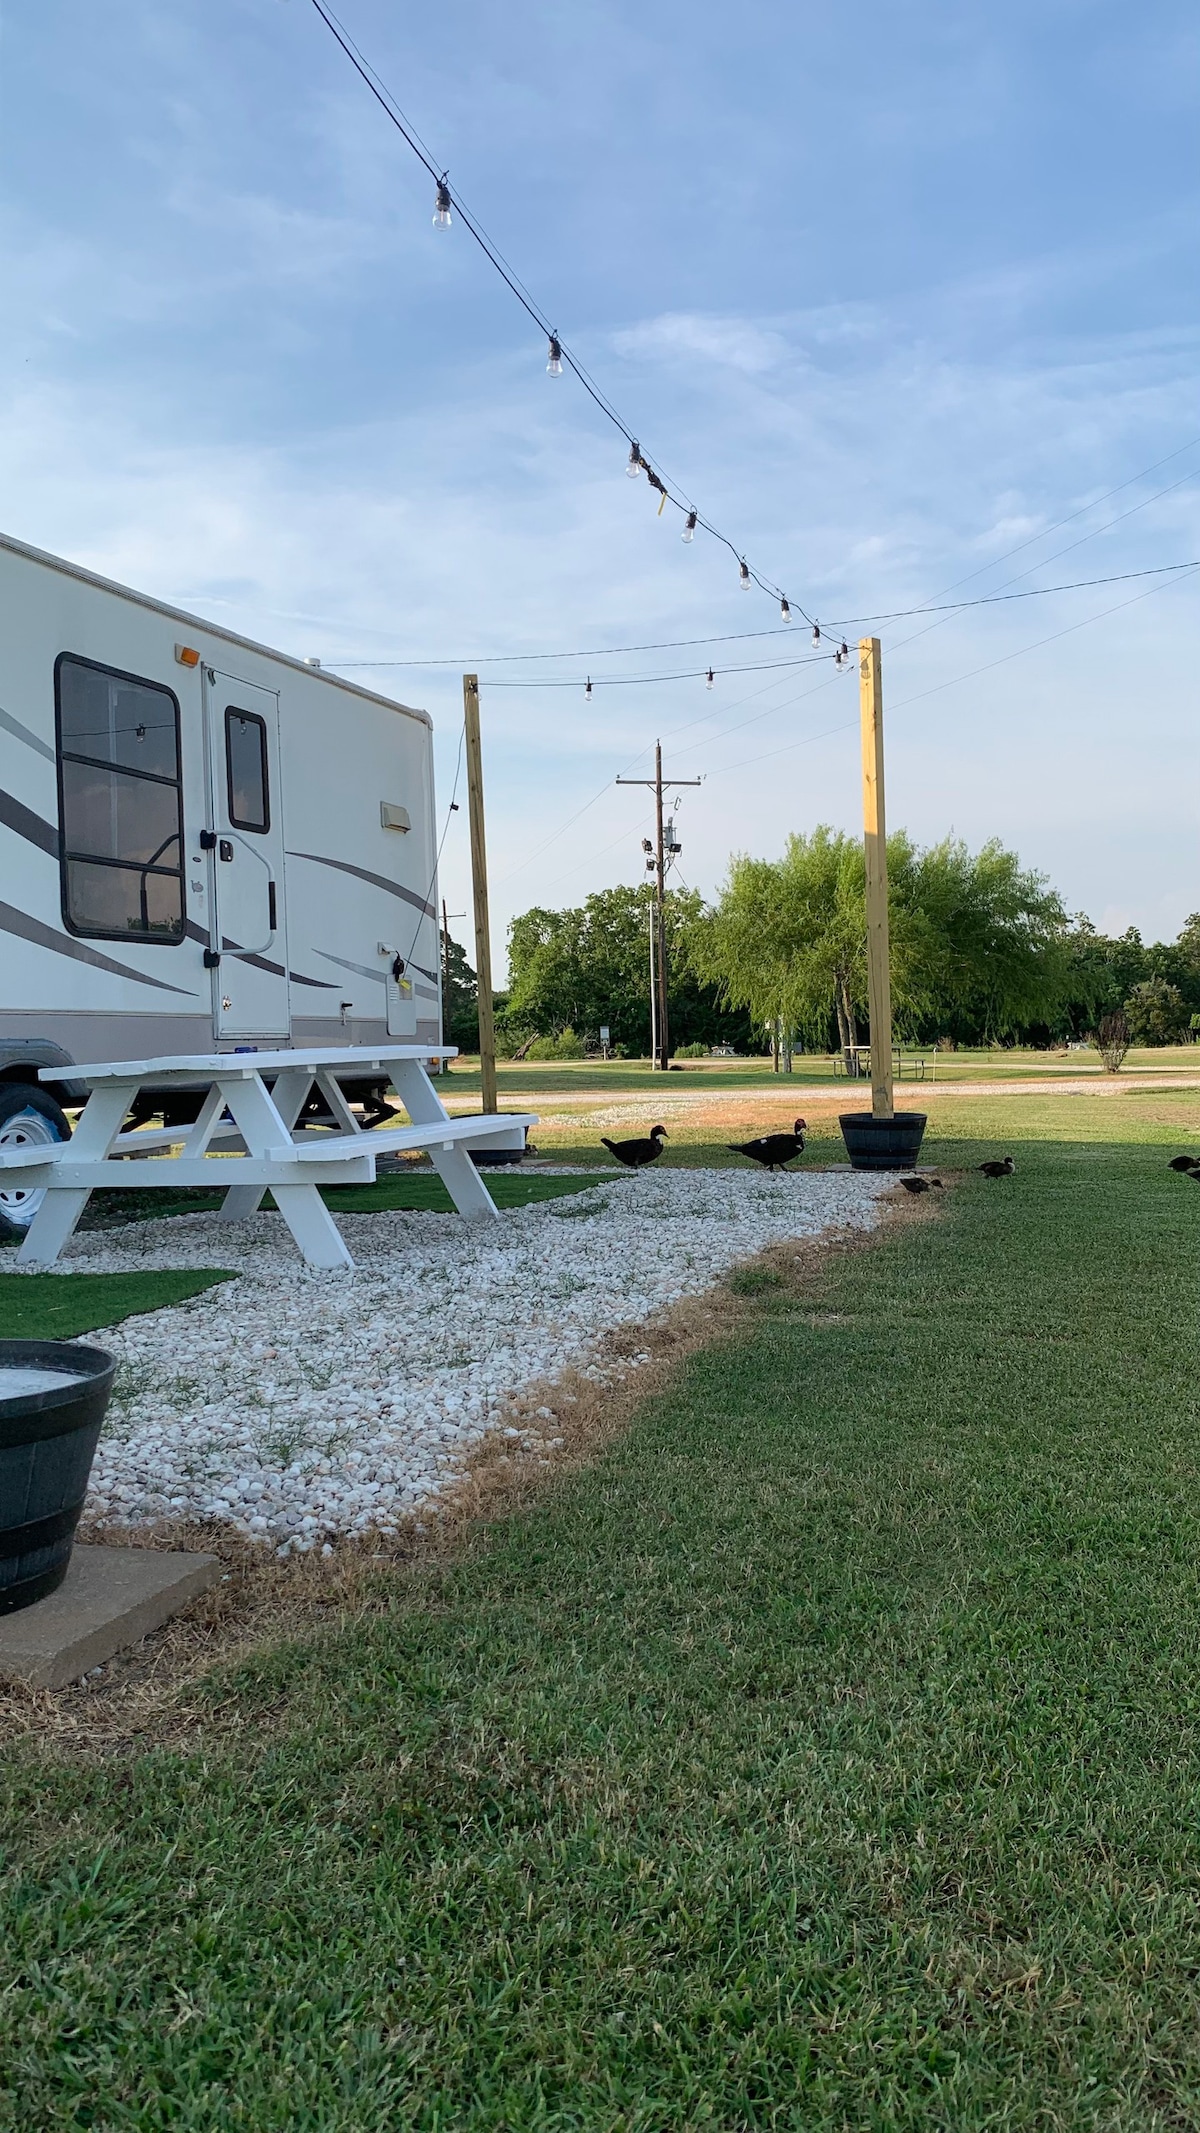 Glamping Anahuac Style!